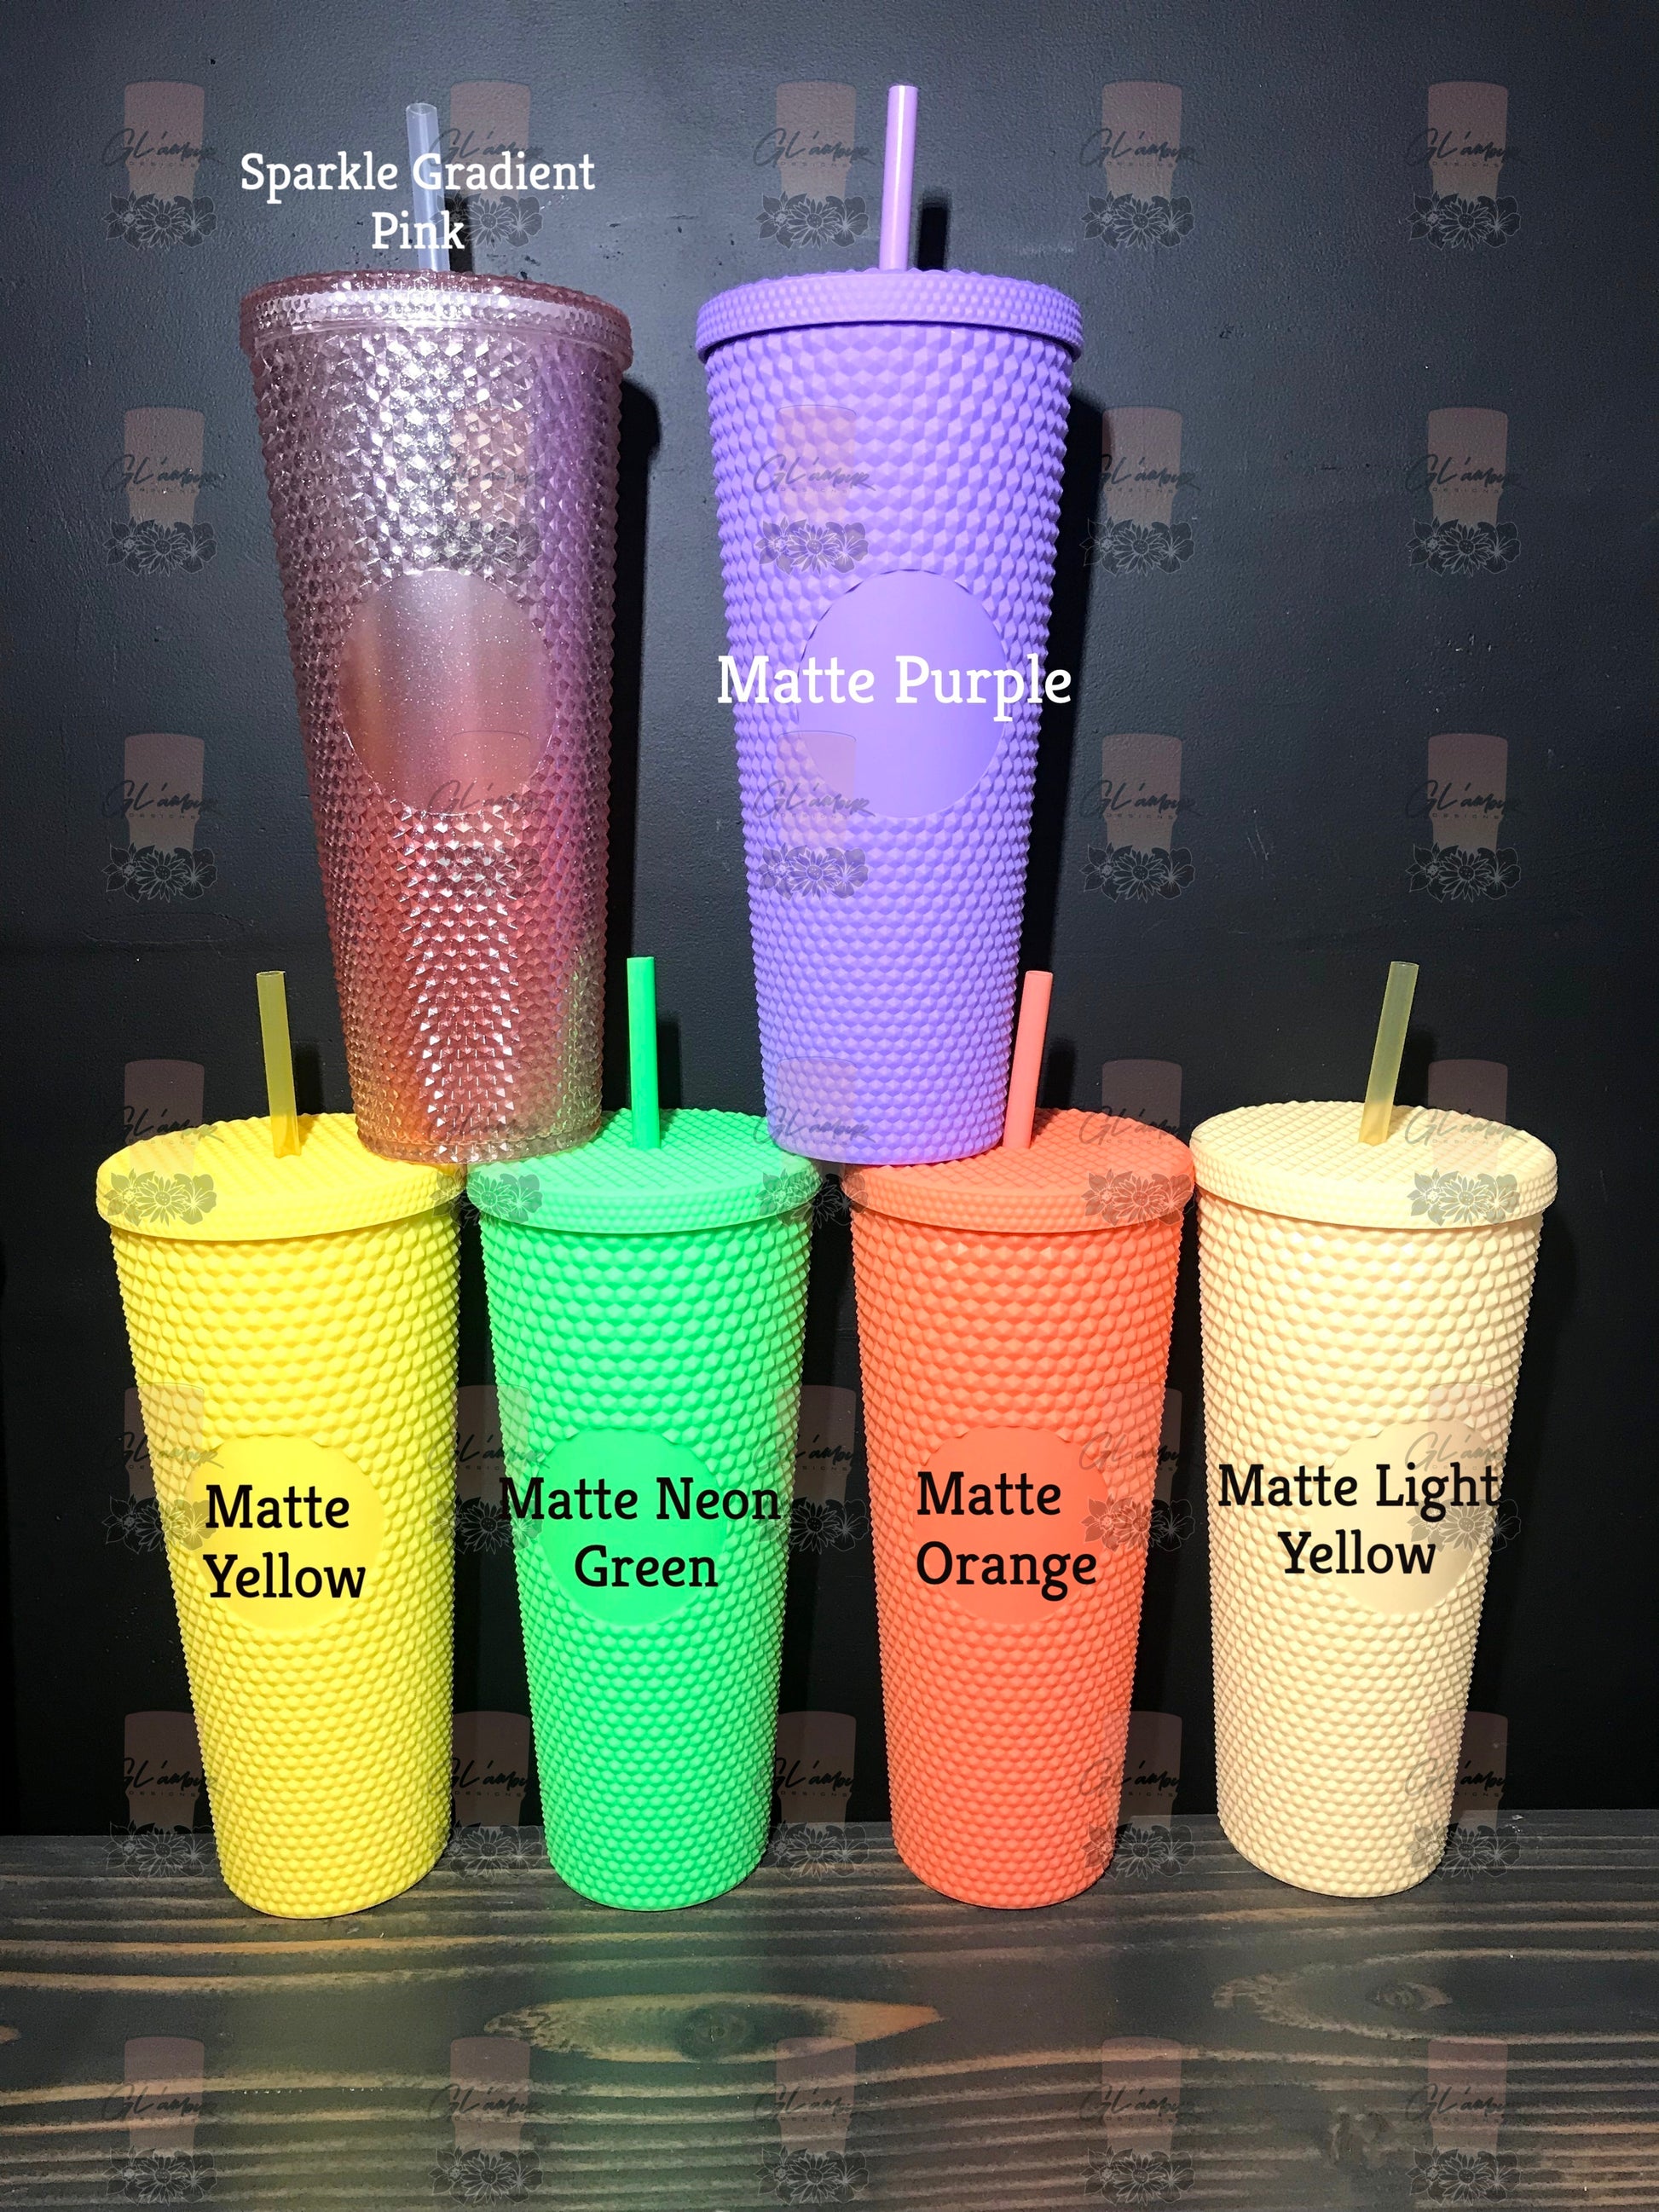 Reusable Cold Cups 24 Oz Set of 5 Cups L Clear Cups 24 Oz 